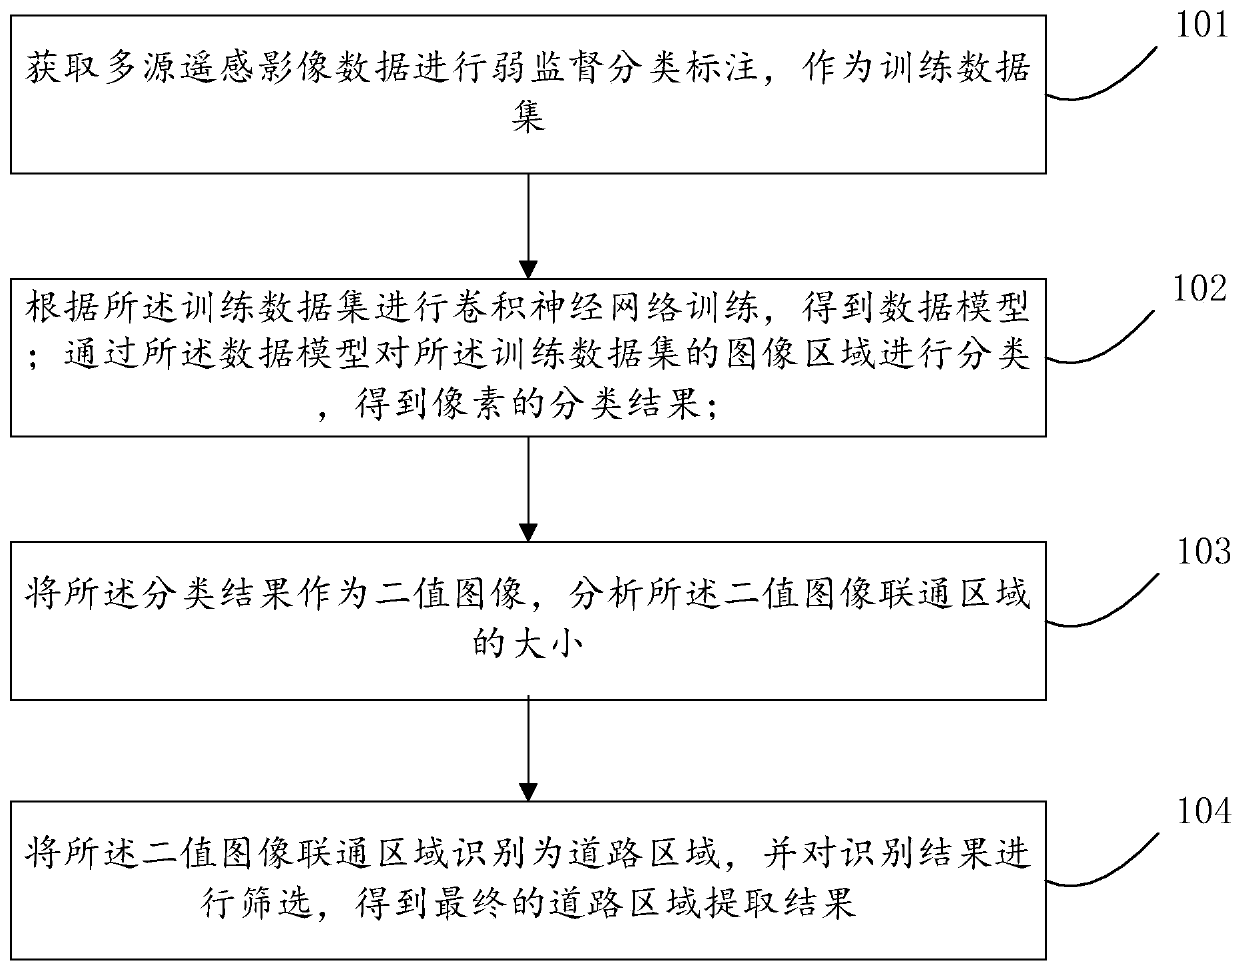 A low-grade road automatic extraction and change analysis method